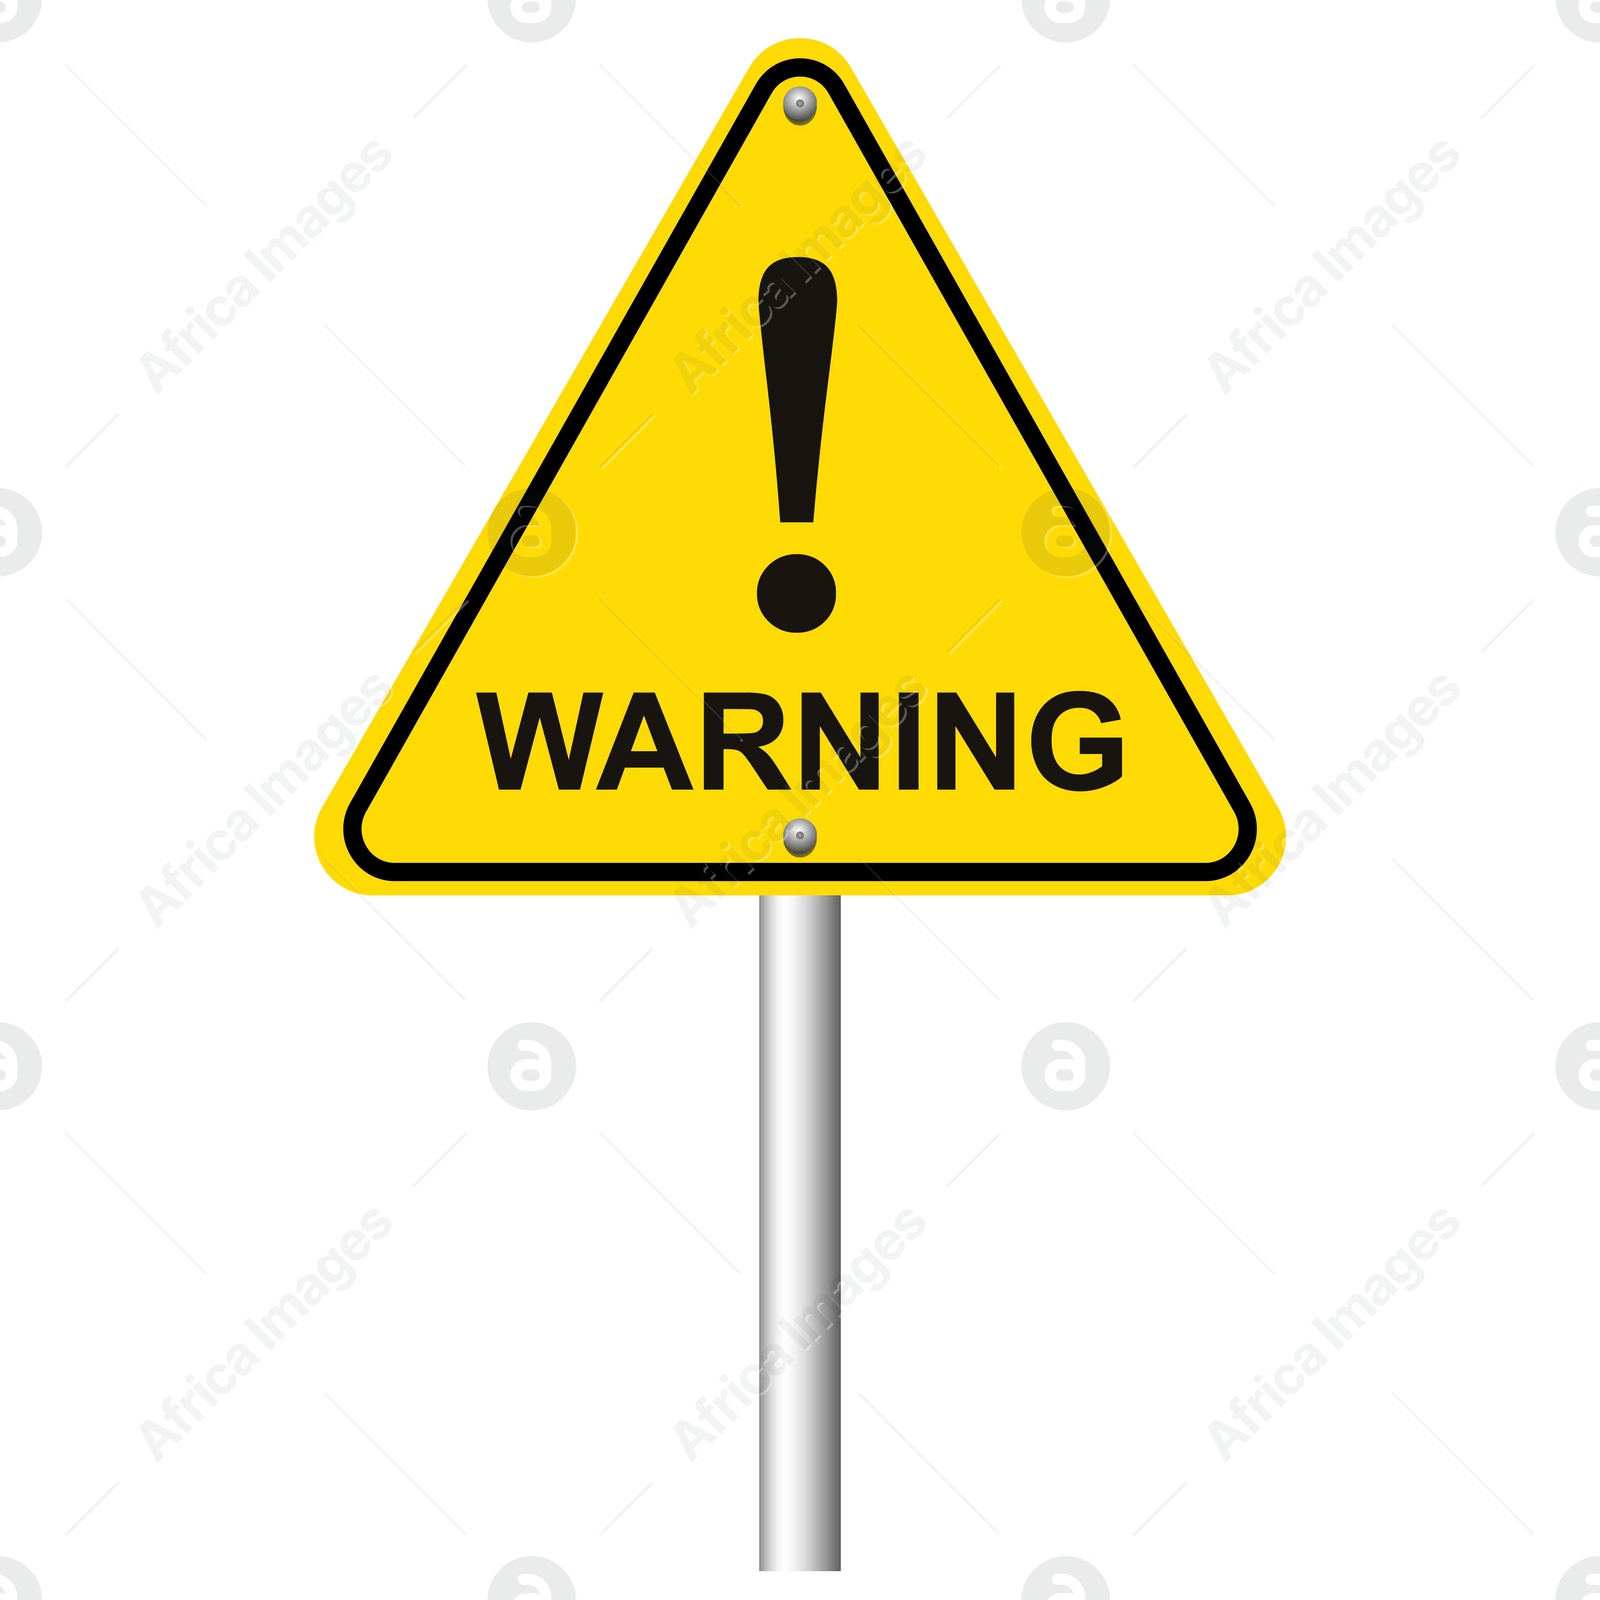 Illustration of Yellow road sign with word Warning and exclamation mark on white background